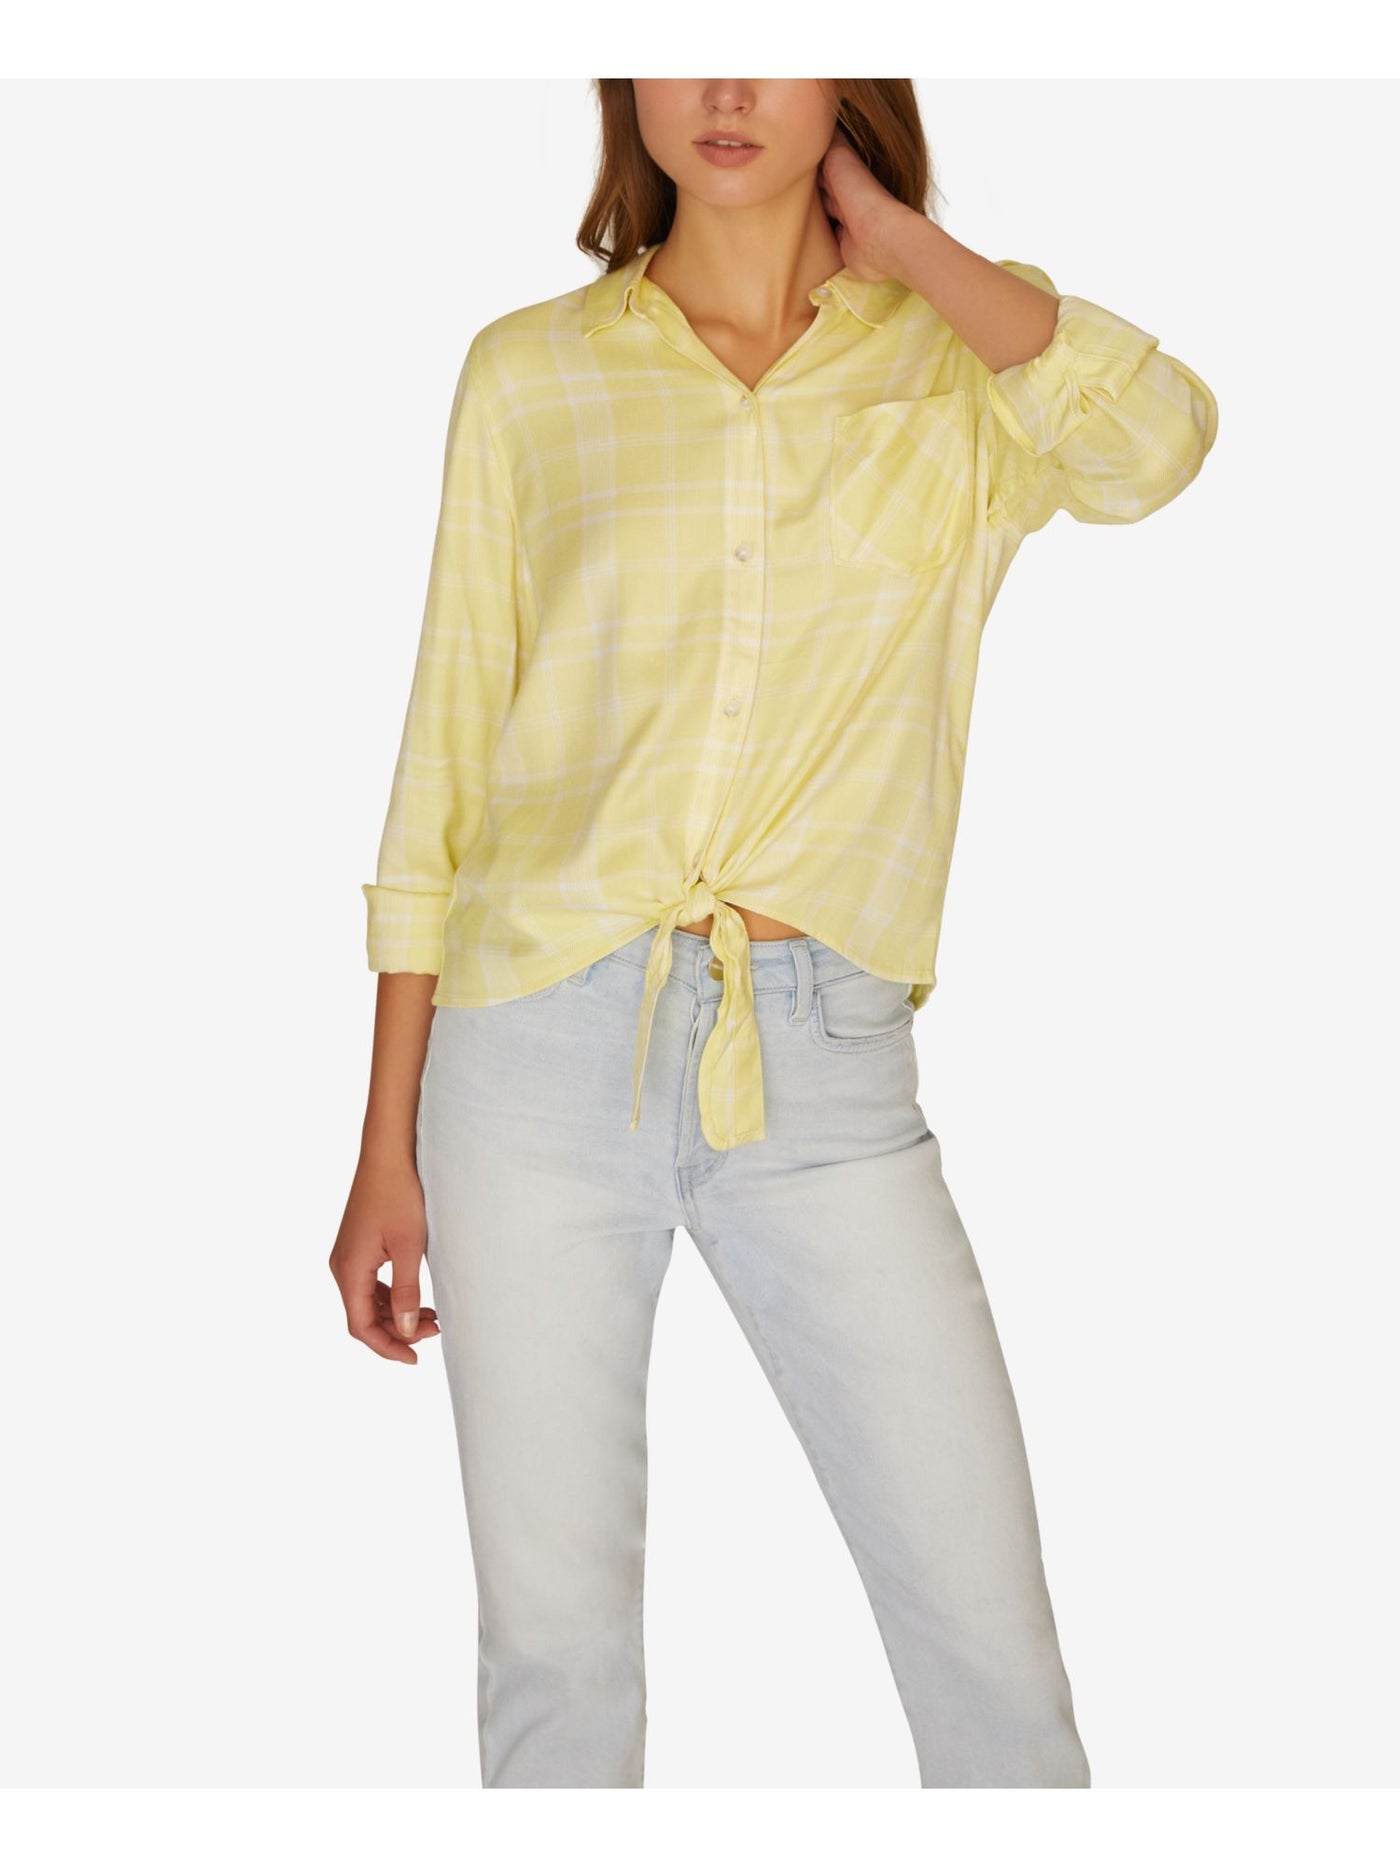 SANCTUARY Womens Yellow Pocketed Tie Front Plaid Long Sleeve Collared Button Up Top L